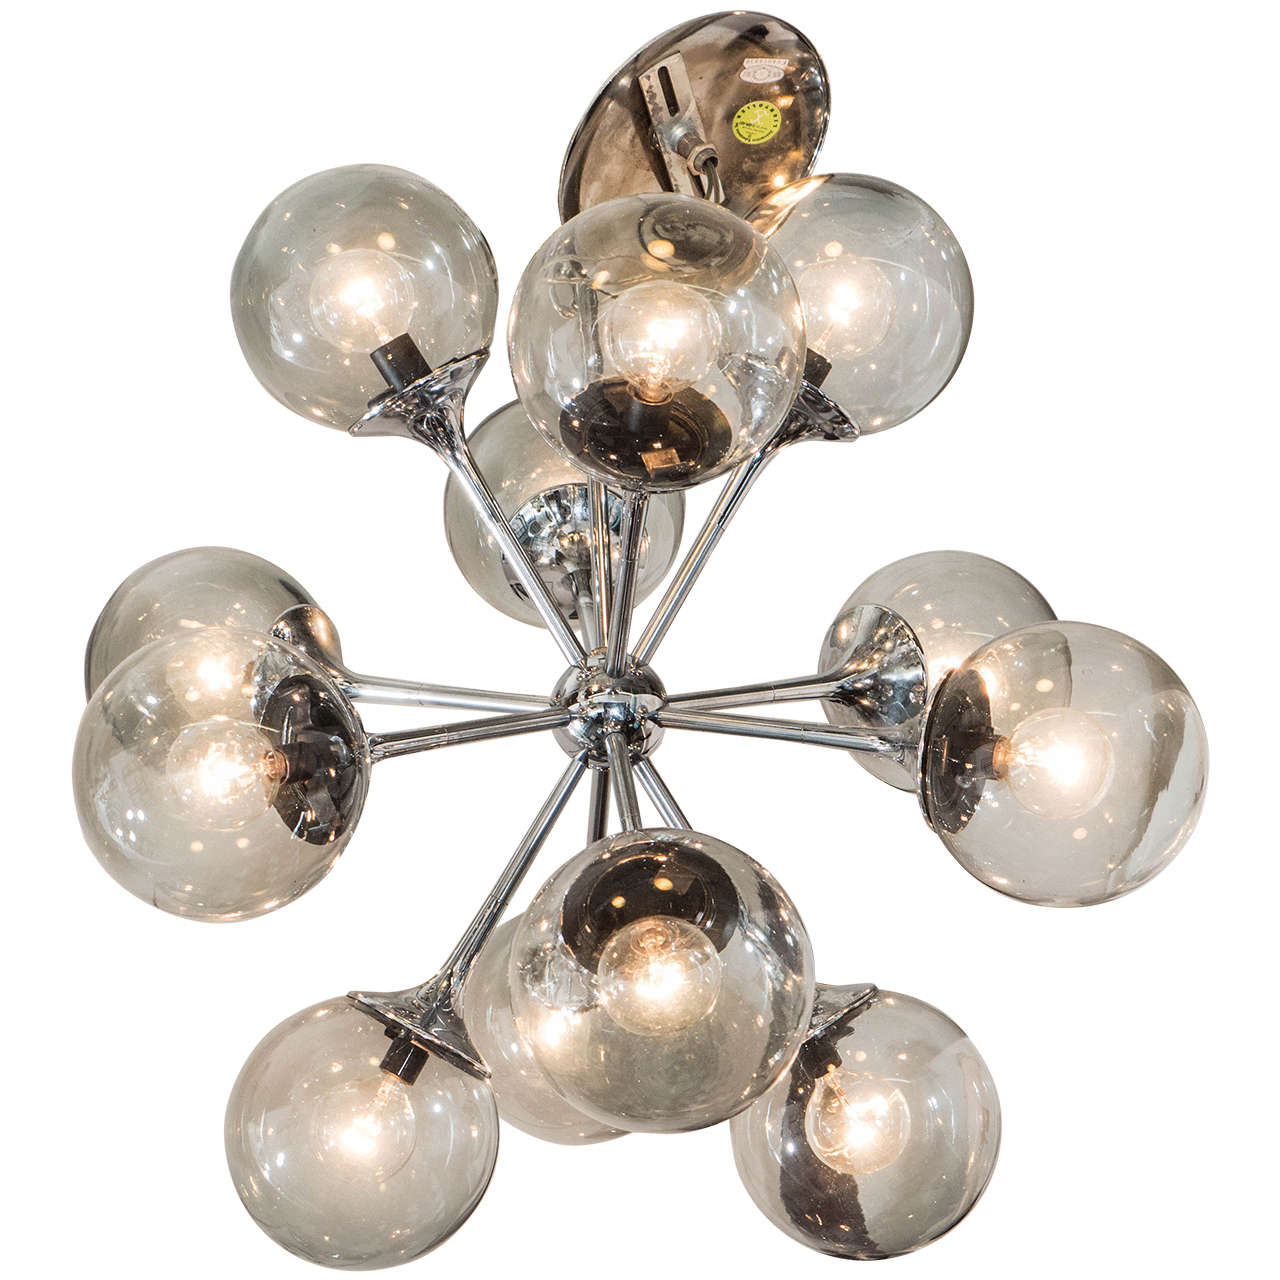 Midcentury Chrome and Smoked Bubble Glass Sputnik Chandelier by Lightolier